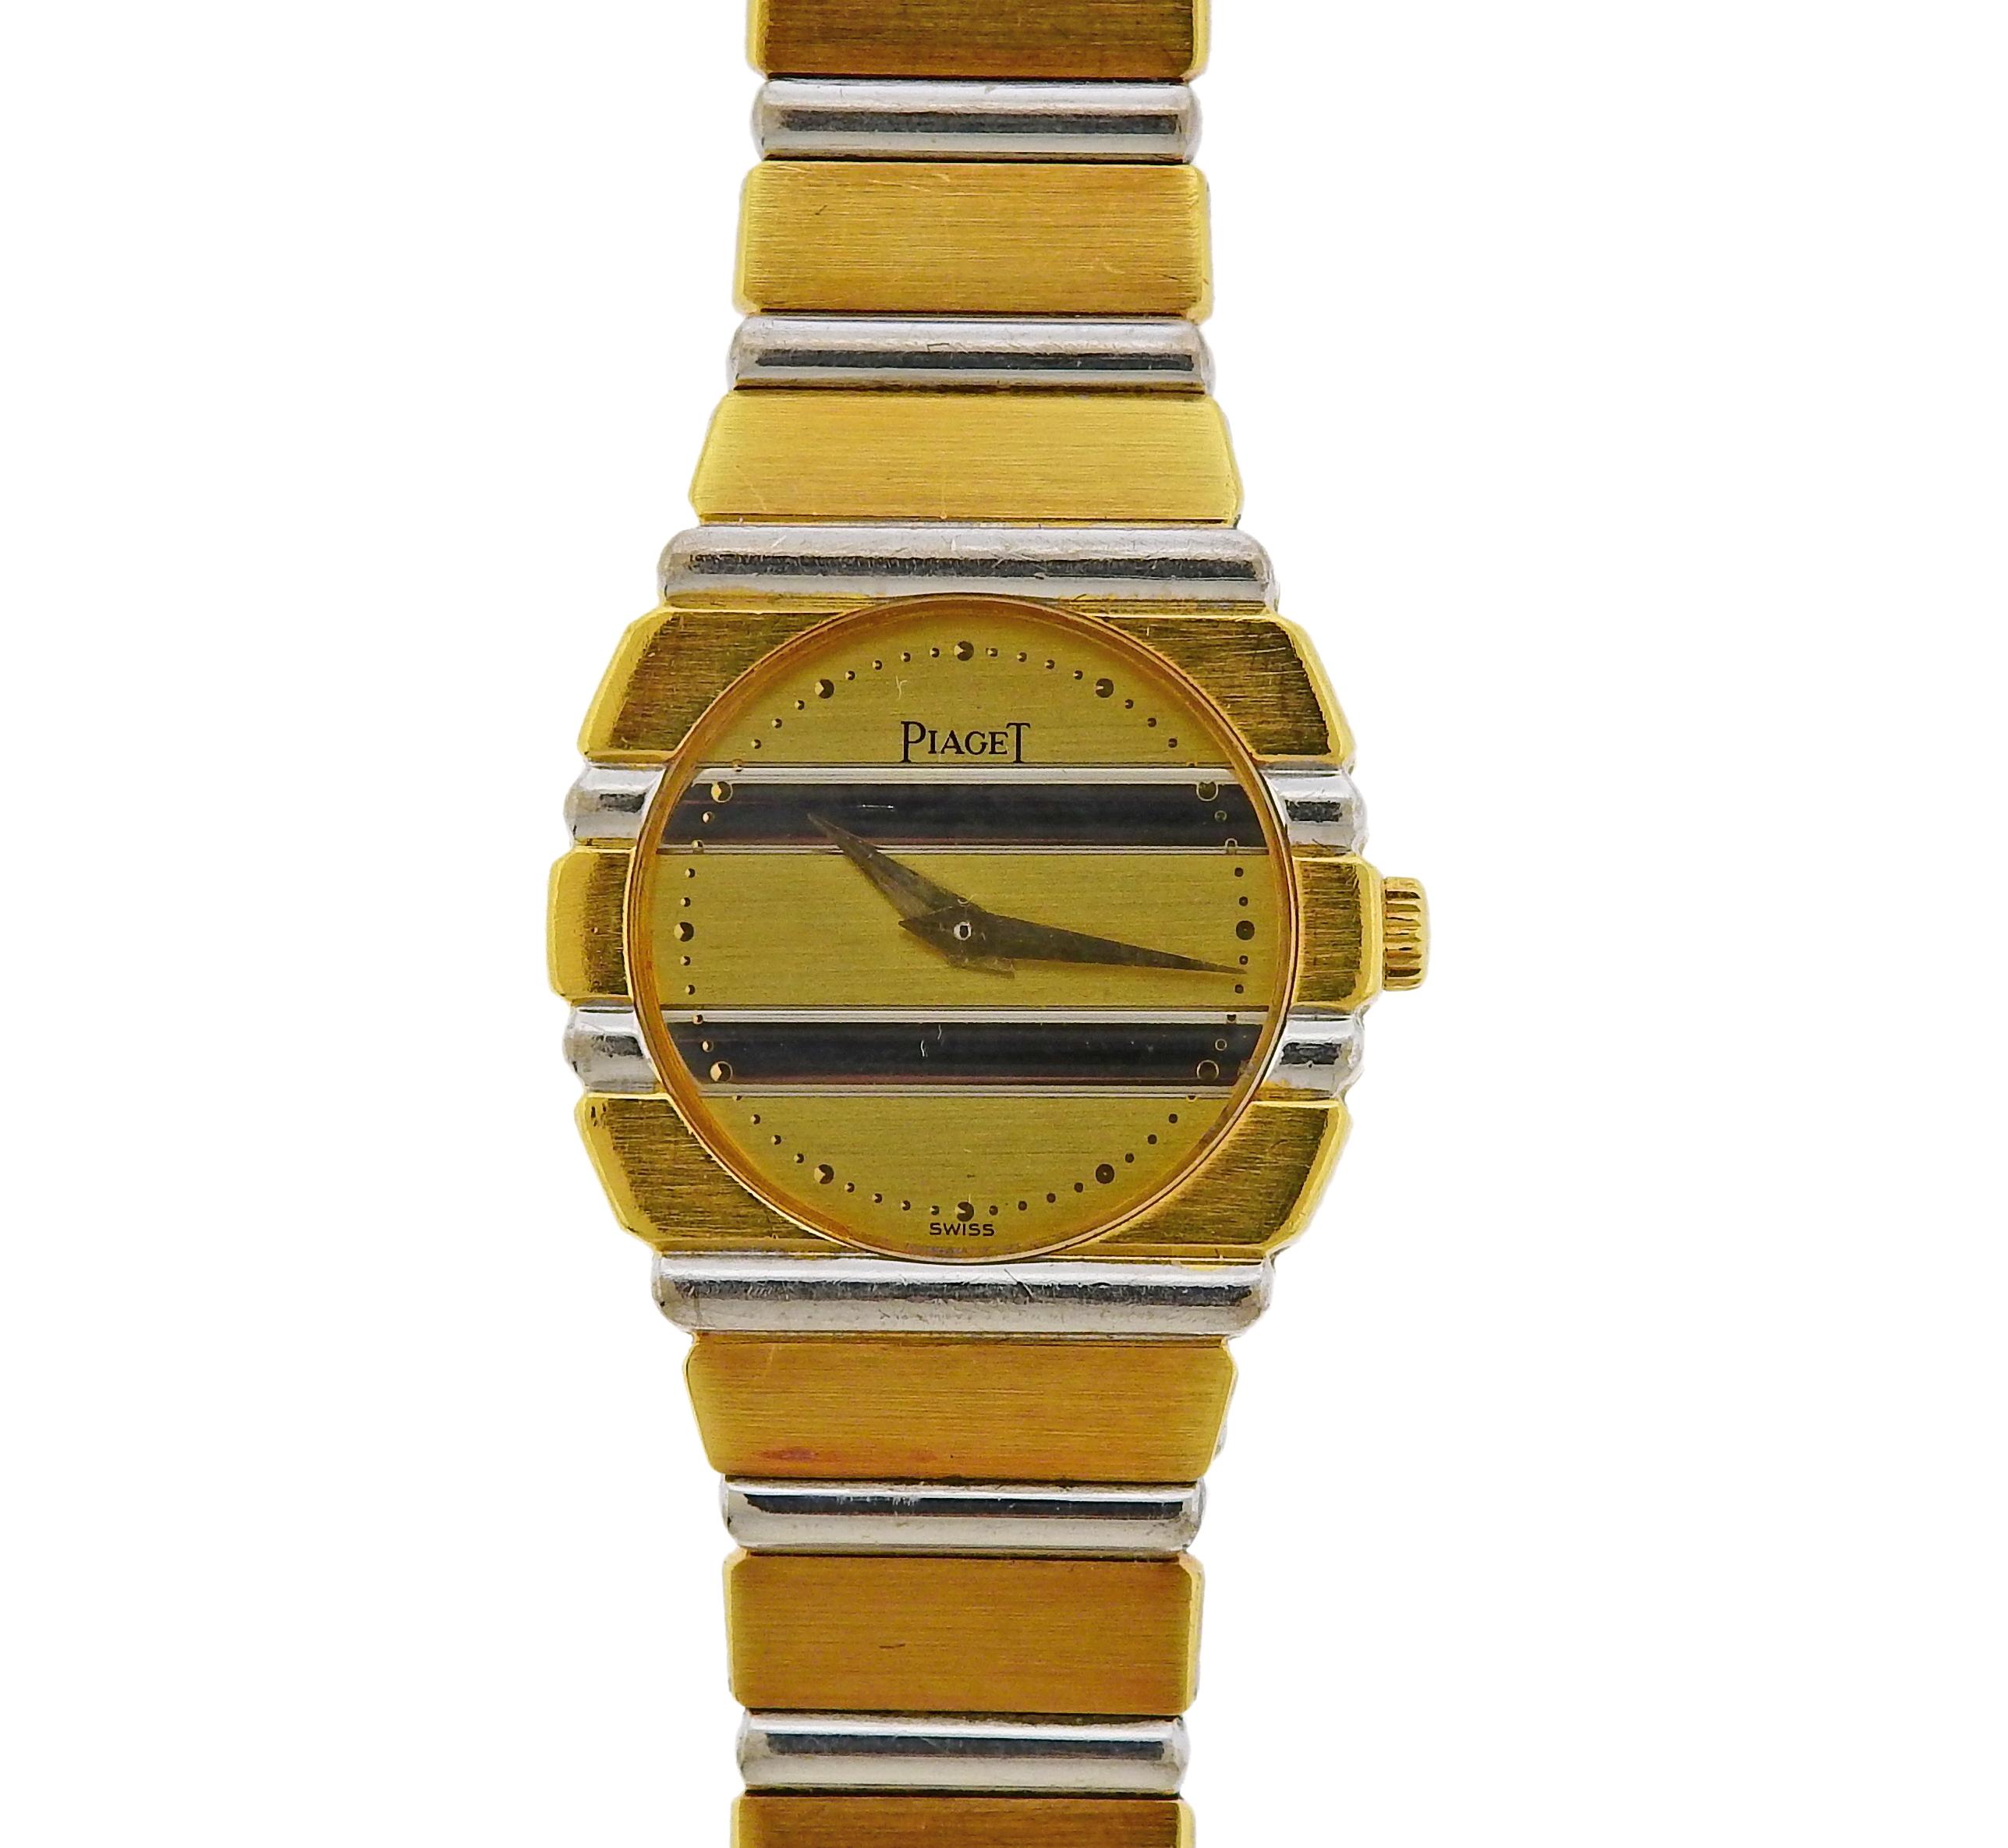 18k white and yellow gold Polo watch by Piaget., with quartz movement. The bracelet is 6.75